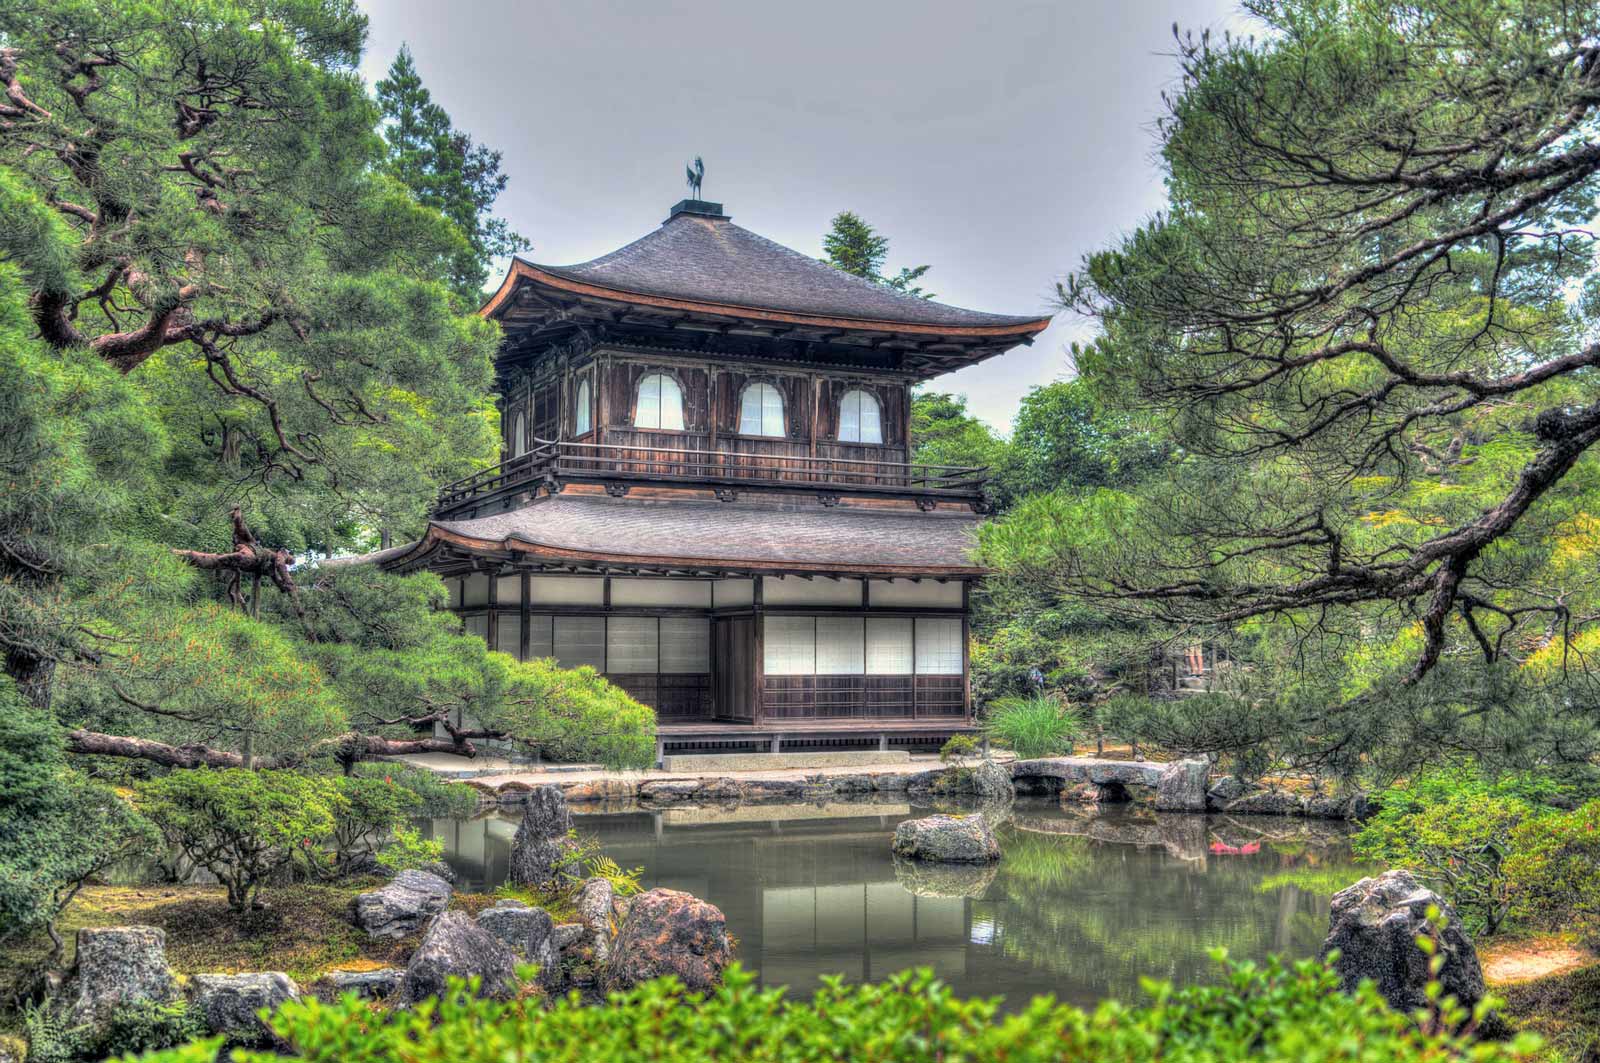 Best Things to do in Kyoto Japan